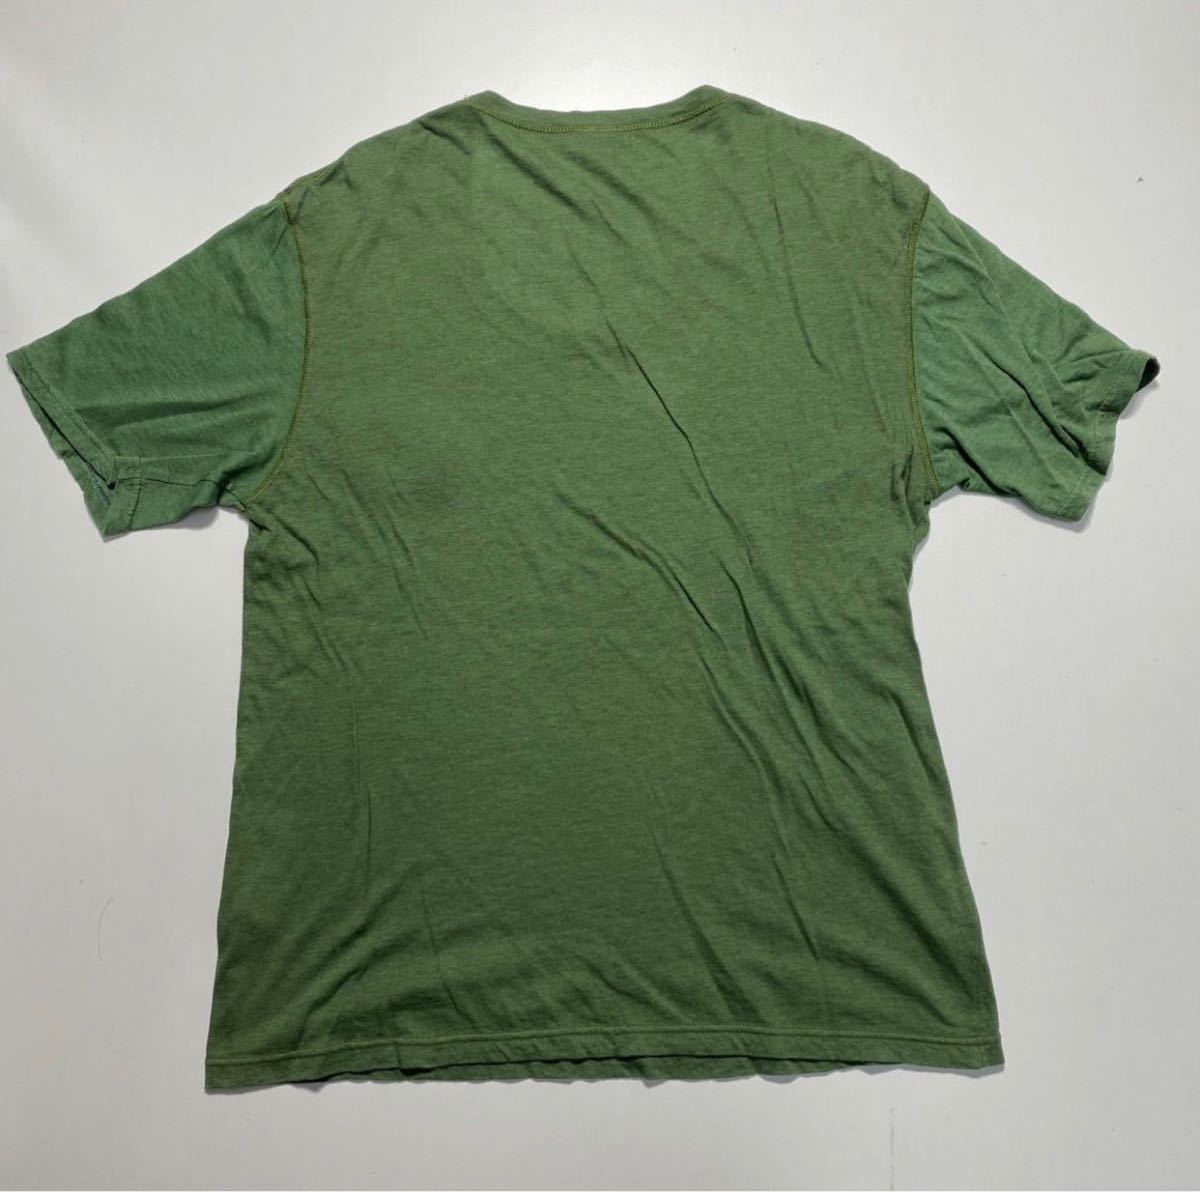 【M】DUCK and COVER U.S.AIR FORCES LOGO TEE ダックアンドカバー アメリカ空軍空軍 ロゴ Tシャツ 刺繍 日本製 Y815_画像2